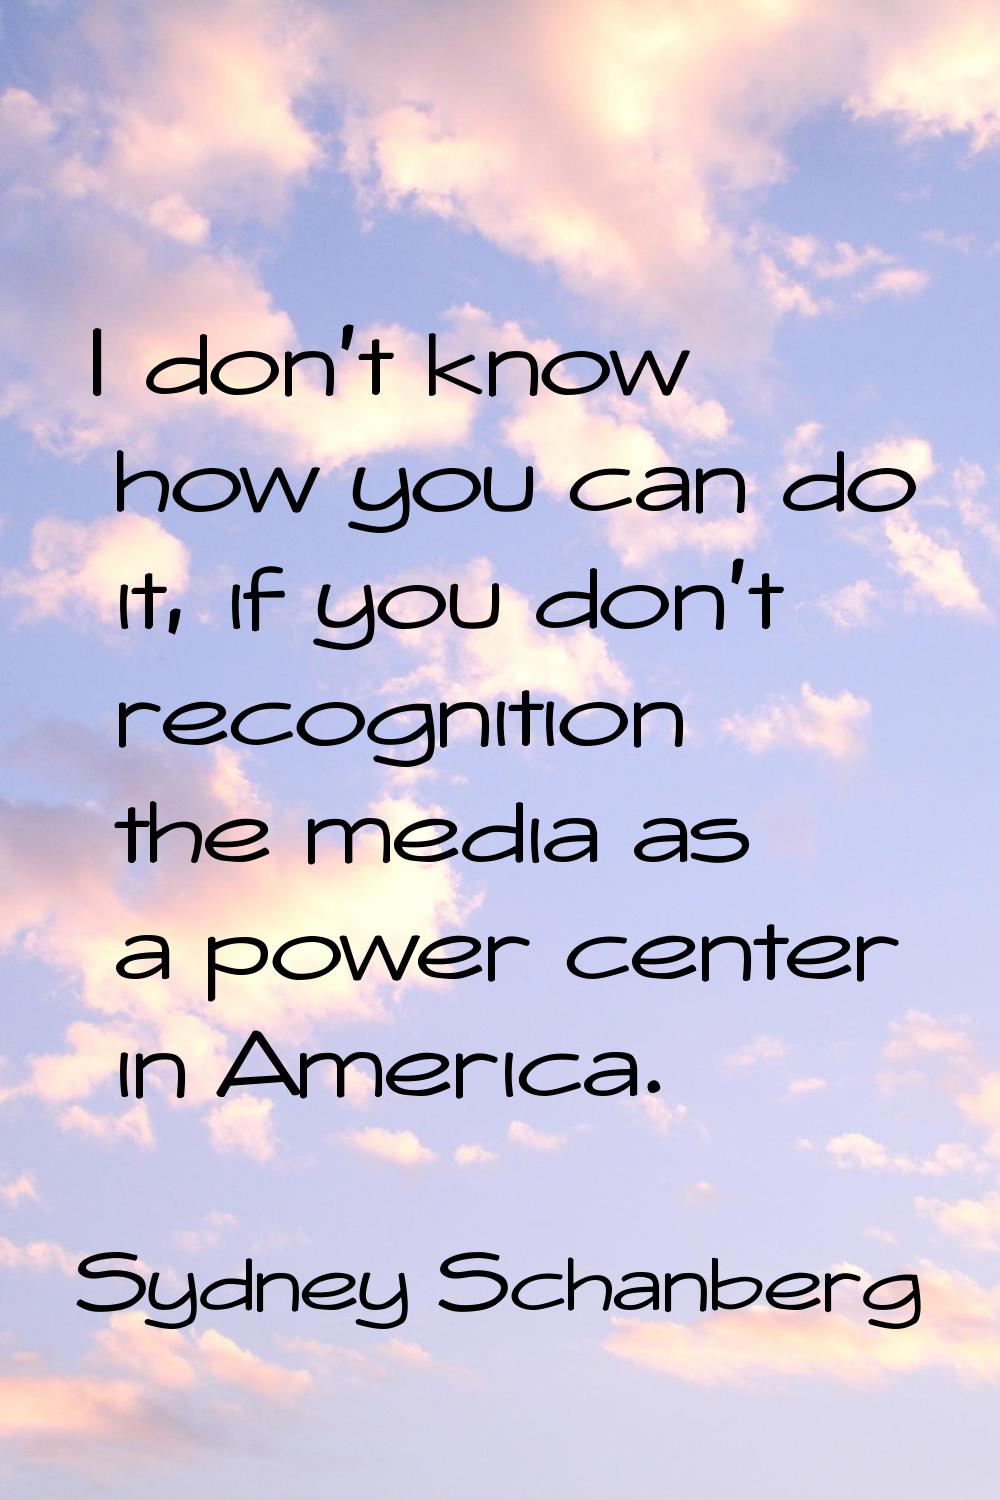 I don't know how you can do it, if you don't recognition the media as a power center in America.